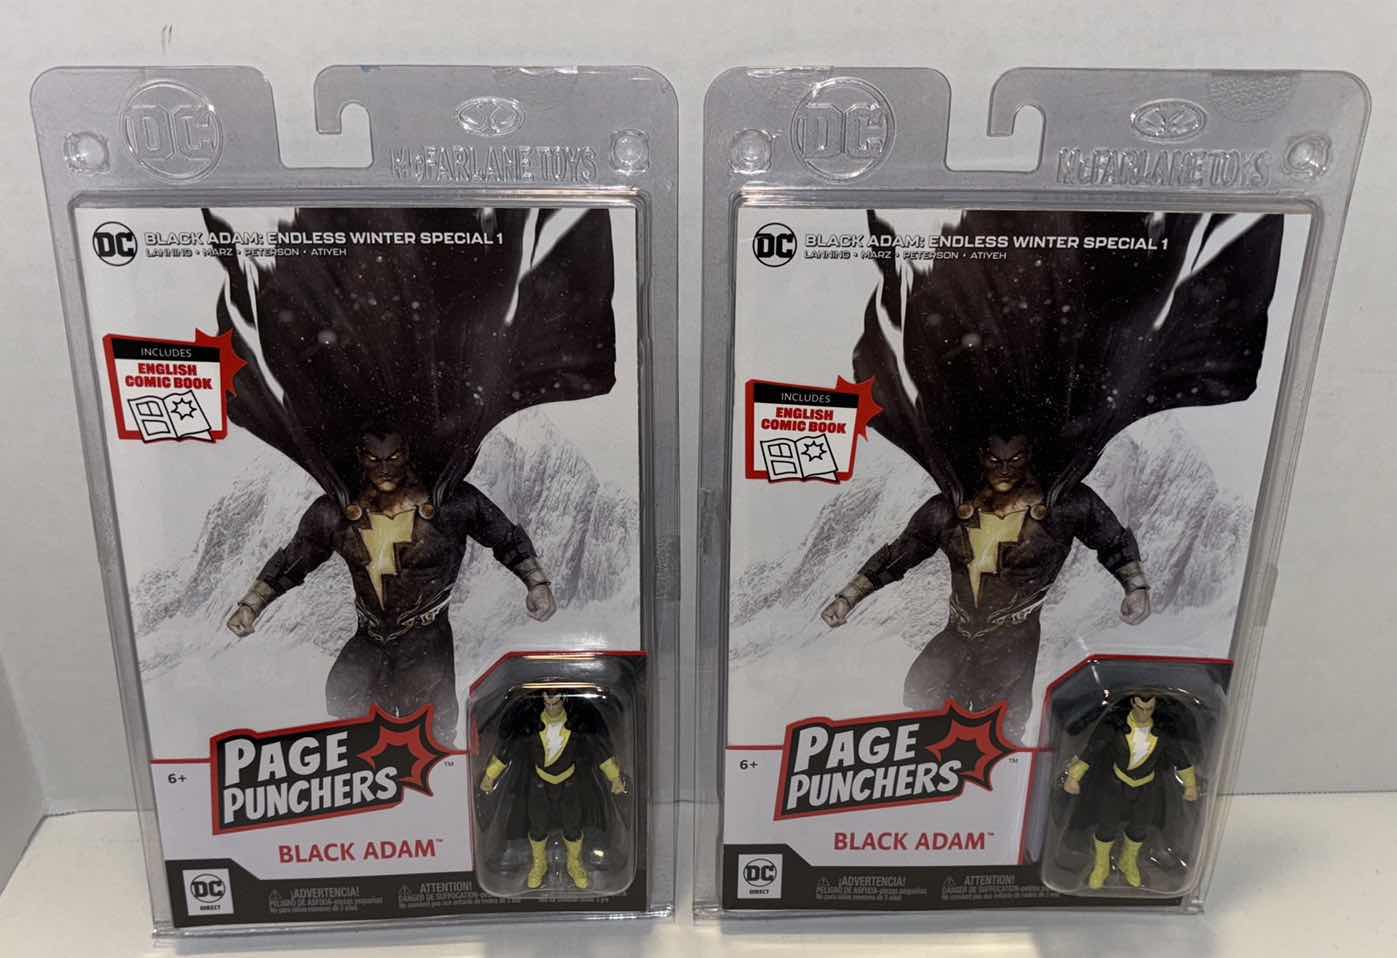 Photo 1 of NEW MCFARLANE TOYS DC DIRECT 2-PACK PAGE PUNCHERS 3” ACTION FIGURE & ENGLISH COMIC BOOK, “BLACK ADAM” & “BLACK ADAM: ENDLESS WINTER SPECIAL 1” COMIC BOOK